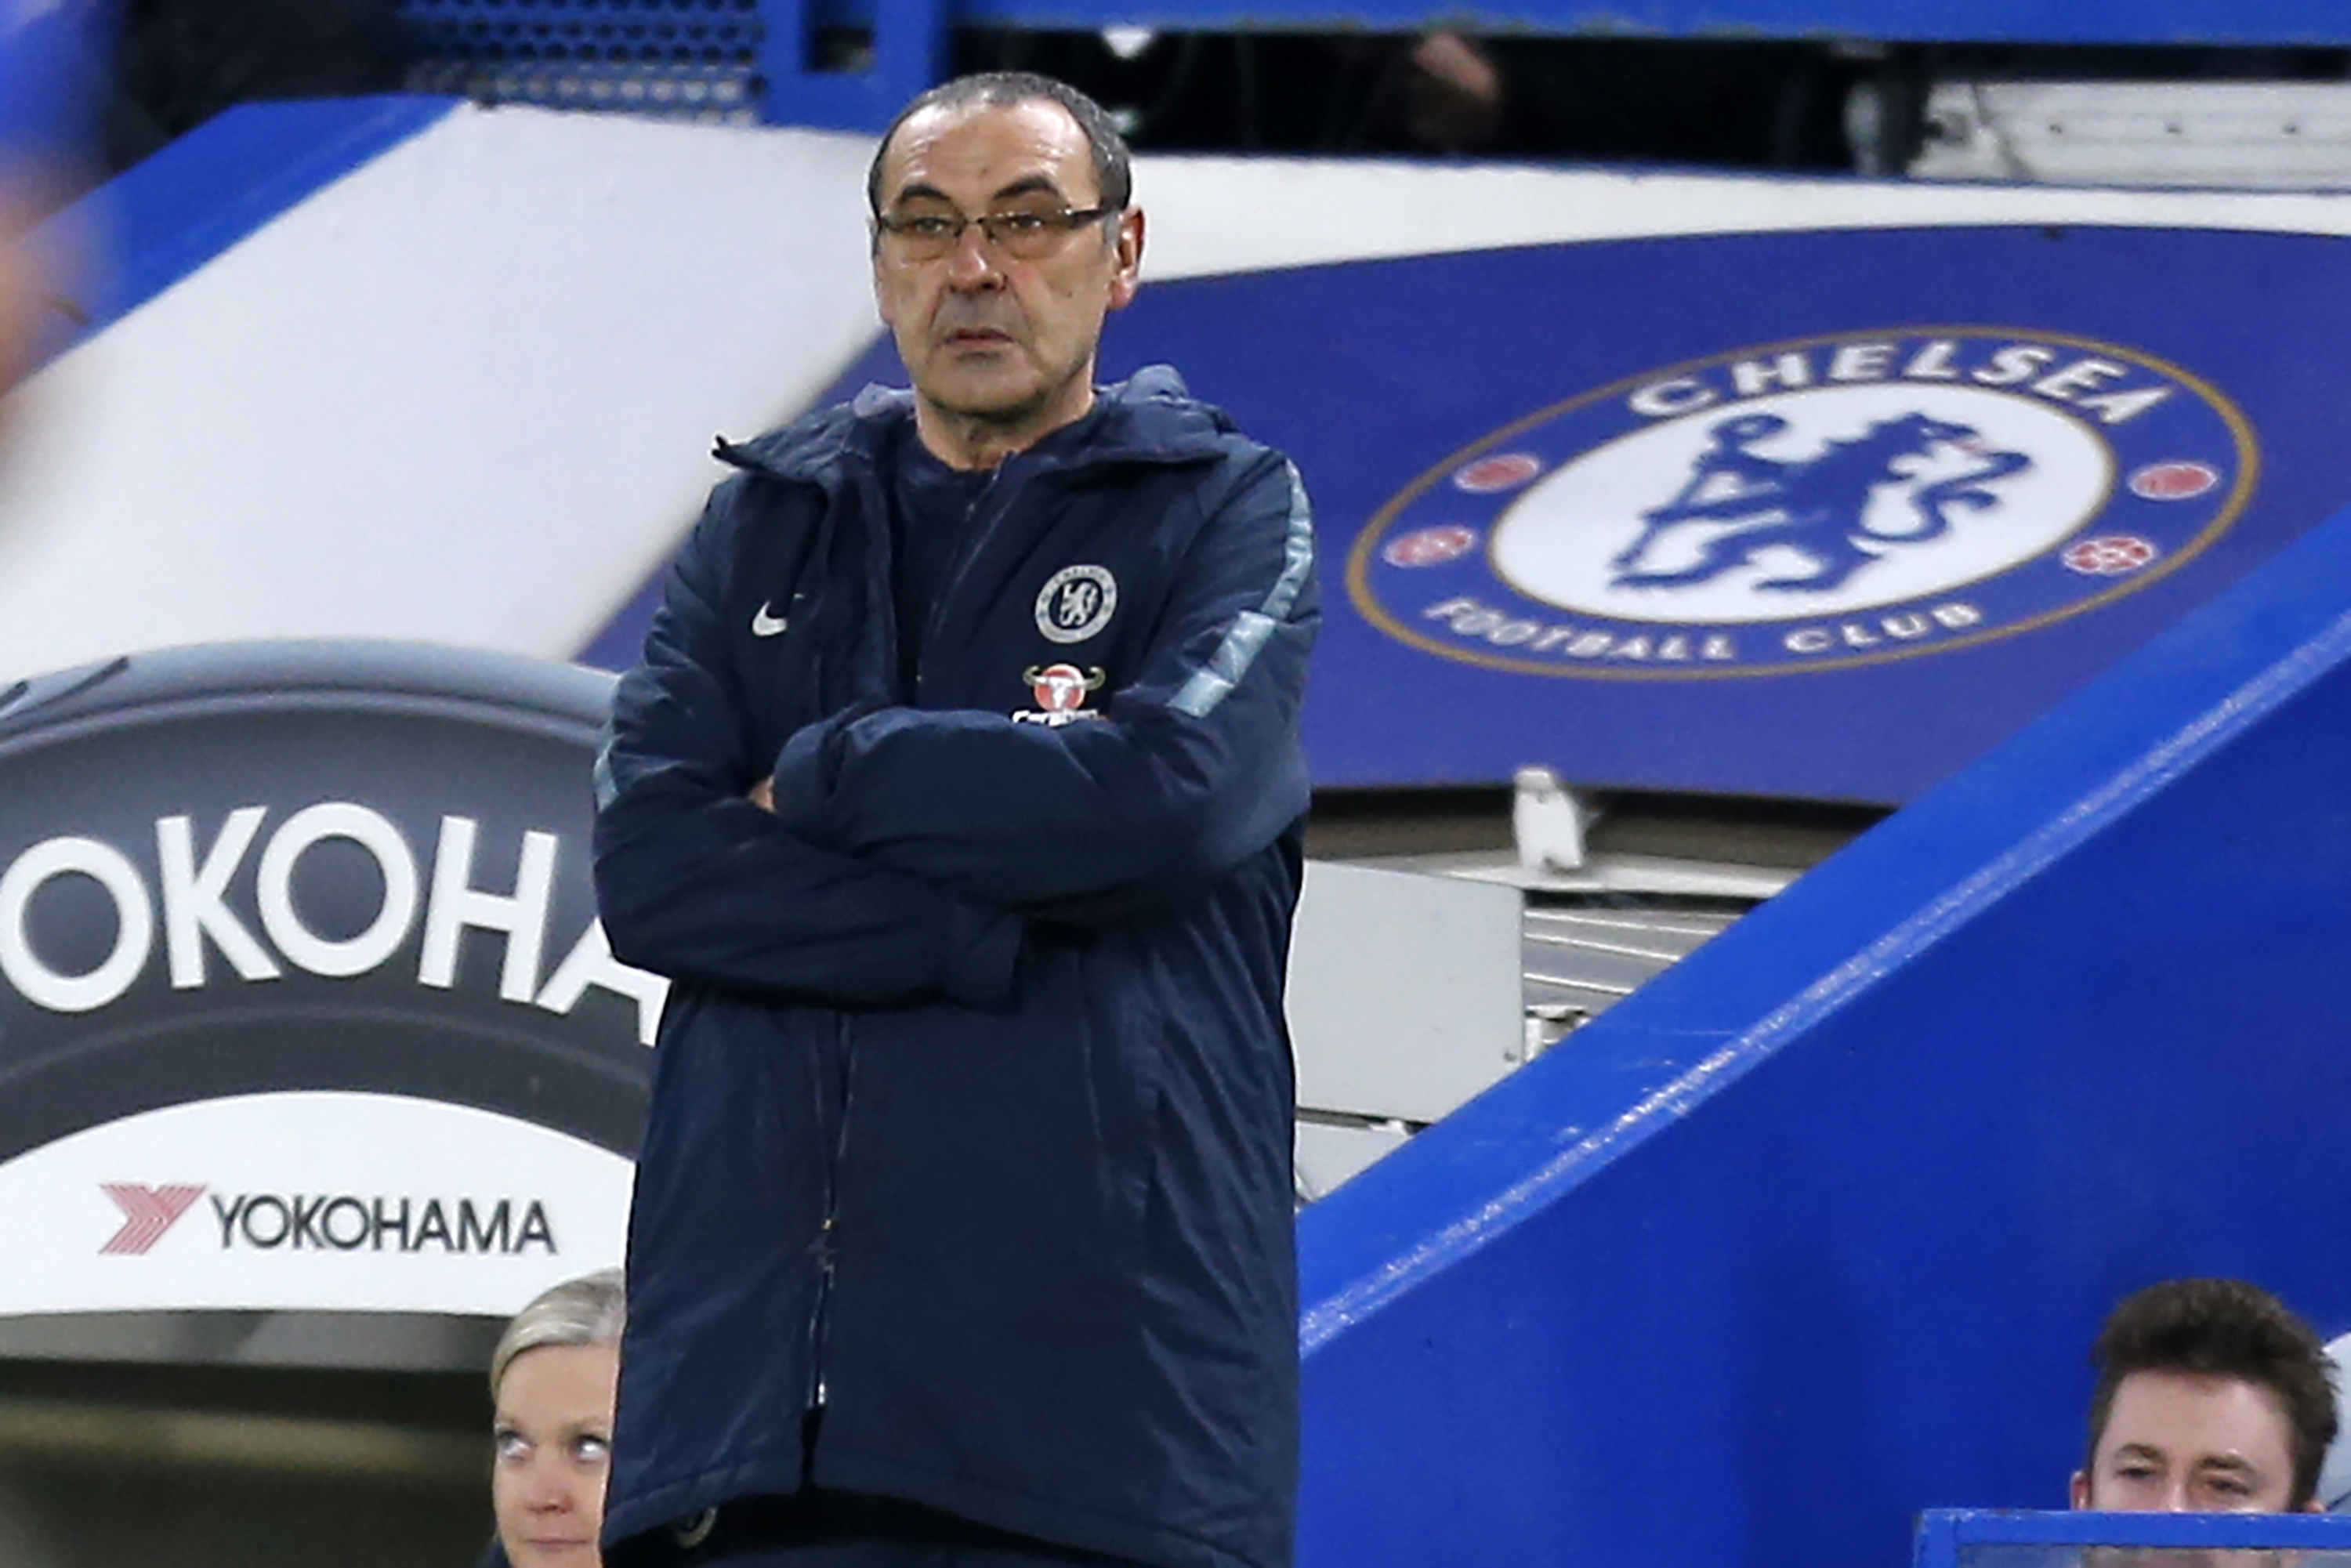 Chelsea's Italian head coach Maurizio Sarri watches from the touchline during the English FA Cup fifth round football match between Chelsea and Manchester United at Stamford Bridge in London on February 18, 2019. (Photo by Ian KINGTON / AFP) / RESTRICTED TO EDITORIAL USE. No use with unauthorized audio, video, data, fixture lists, club/league logos or 'live' services. Online in-match use limited to 120 images. An additional 40 images may be used in extra time. No video emulation. Social media in-match use limited to 120 images. An additional 40 images may be used in extra time. No use in betting publications, games or single club/league/player publications. /         (Photo credit should read IAN KINGTON/AFP/Getty Images)